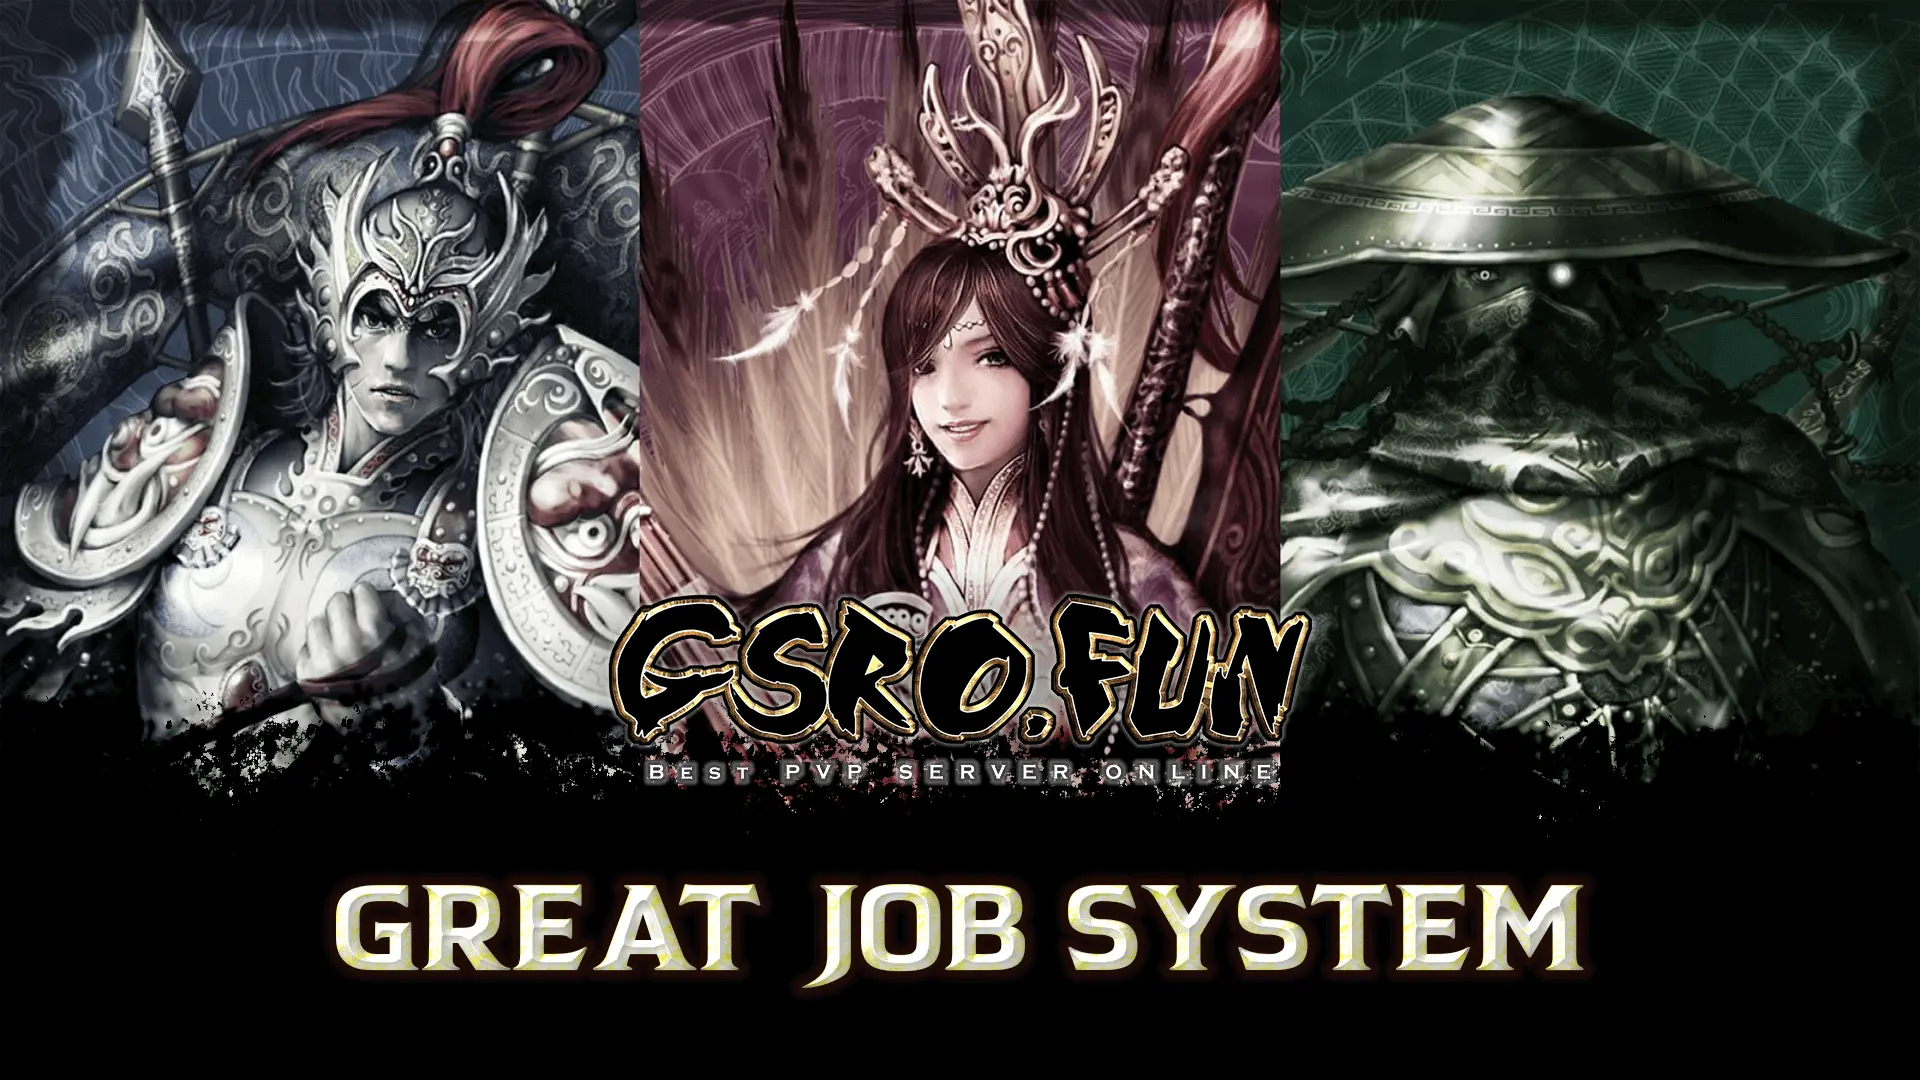 Experience a fresh take on the best job system in silkroad world!